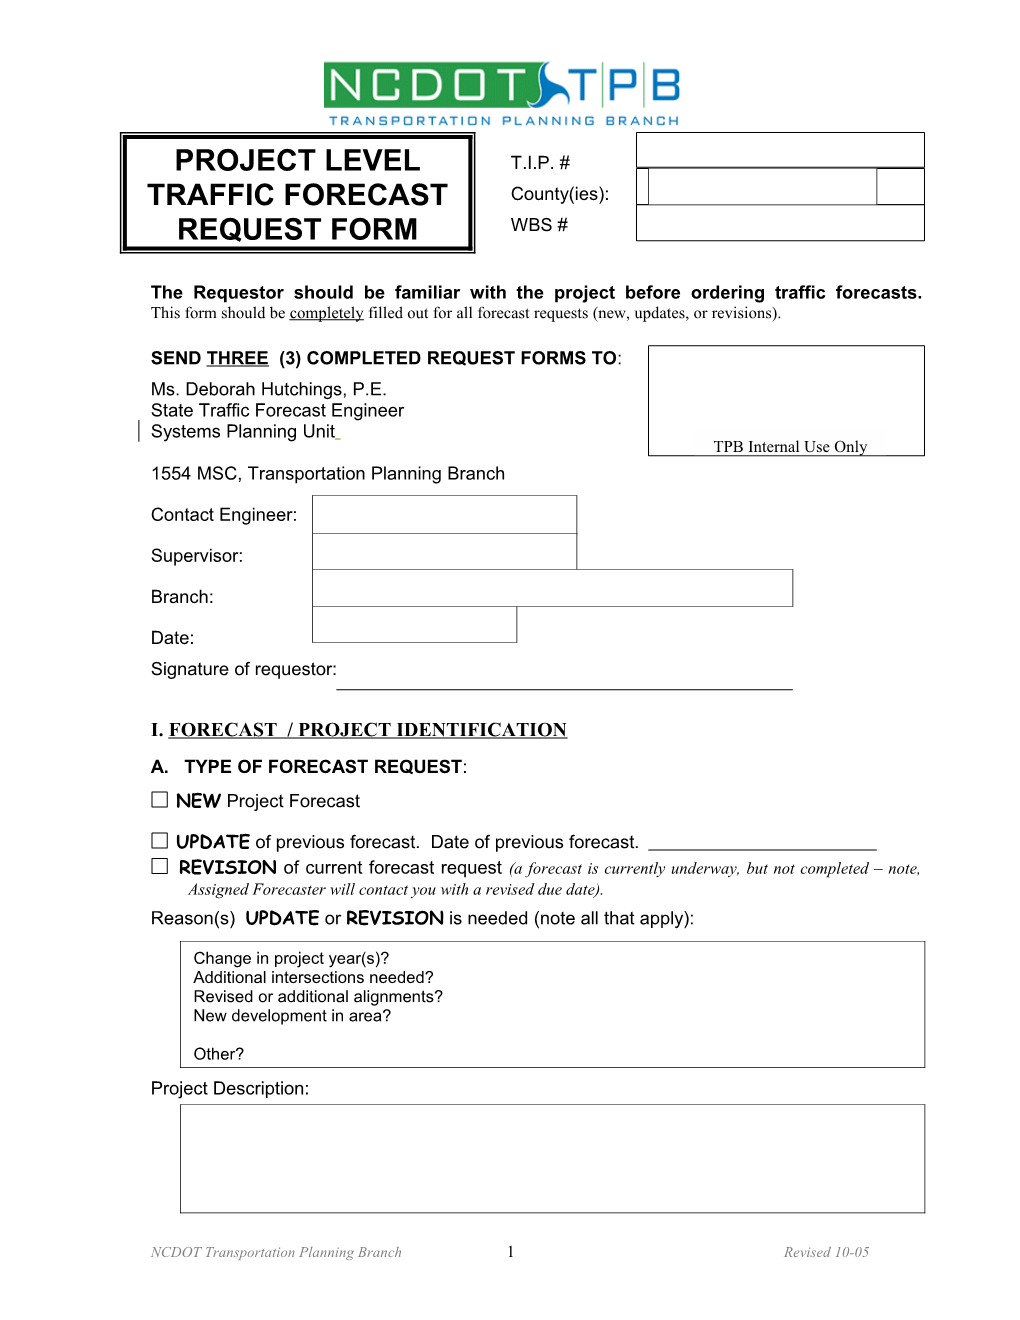 Request for Traffic Forecast